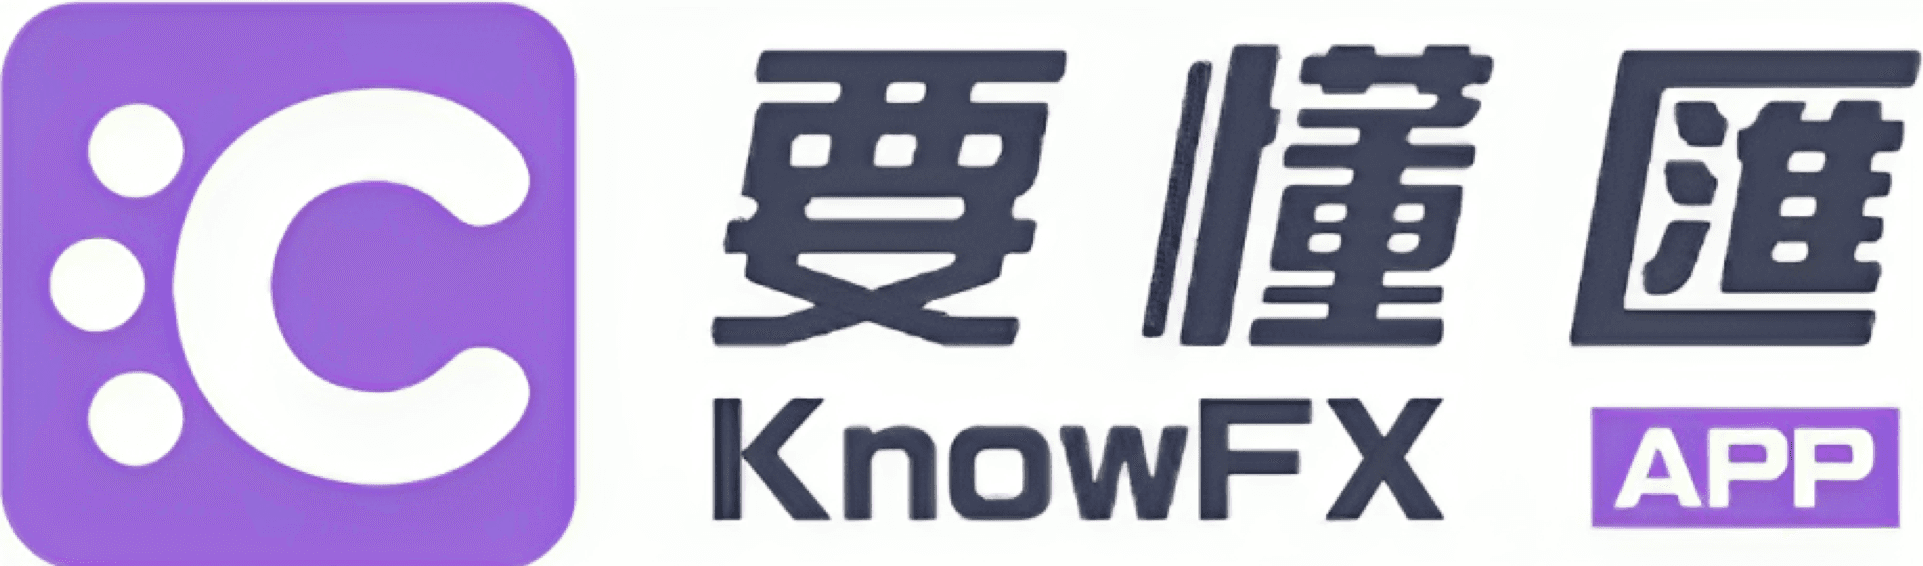 KnowFX